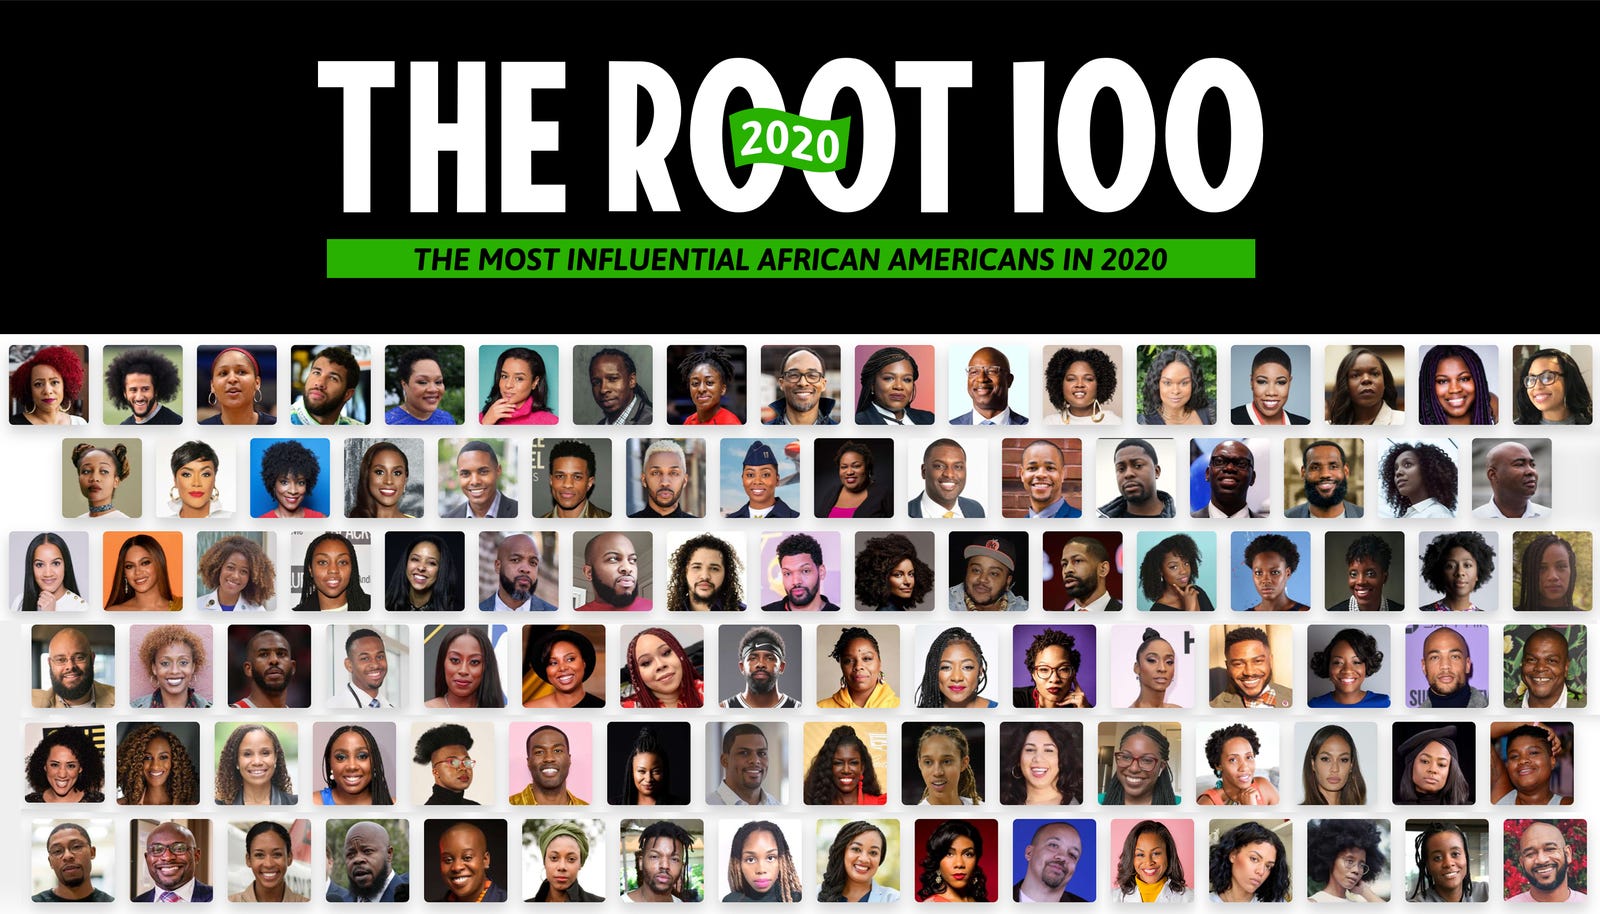 The Most Influential African Americans in 2020